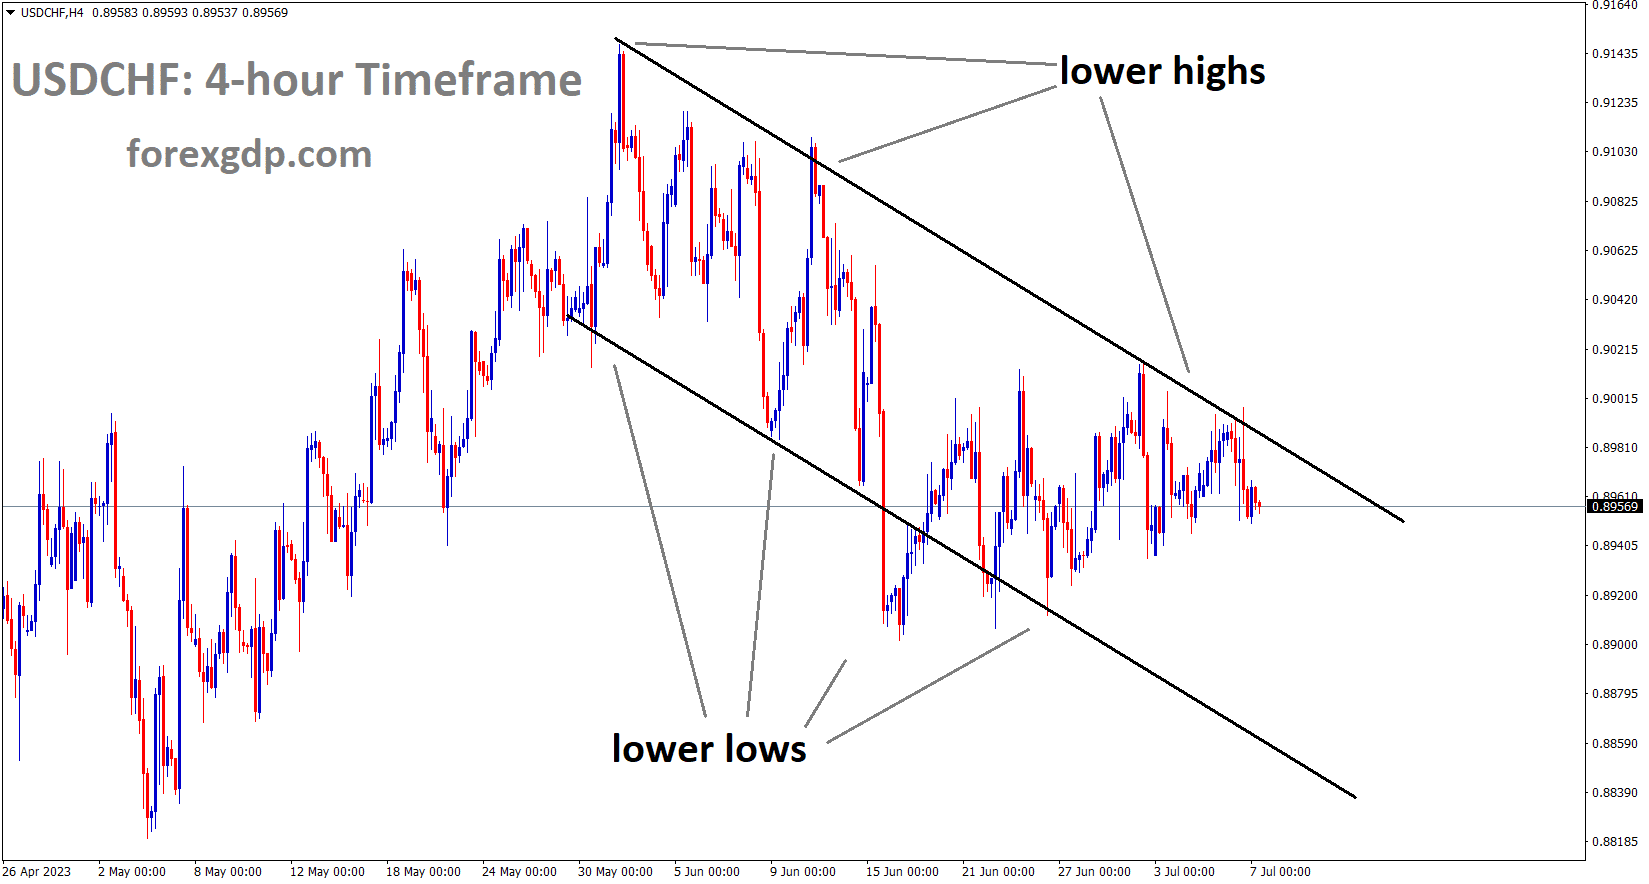 USDCHF H4 TF analysis Market is moving in the Descending channel and the market has fallen from the lower high area of the channel